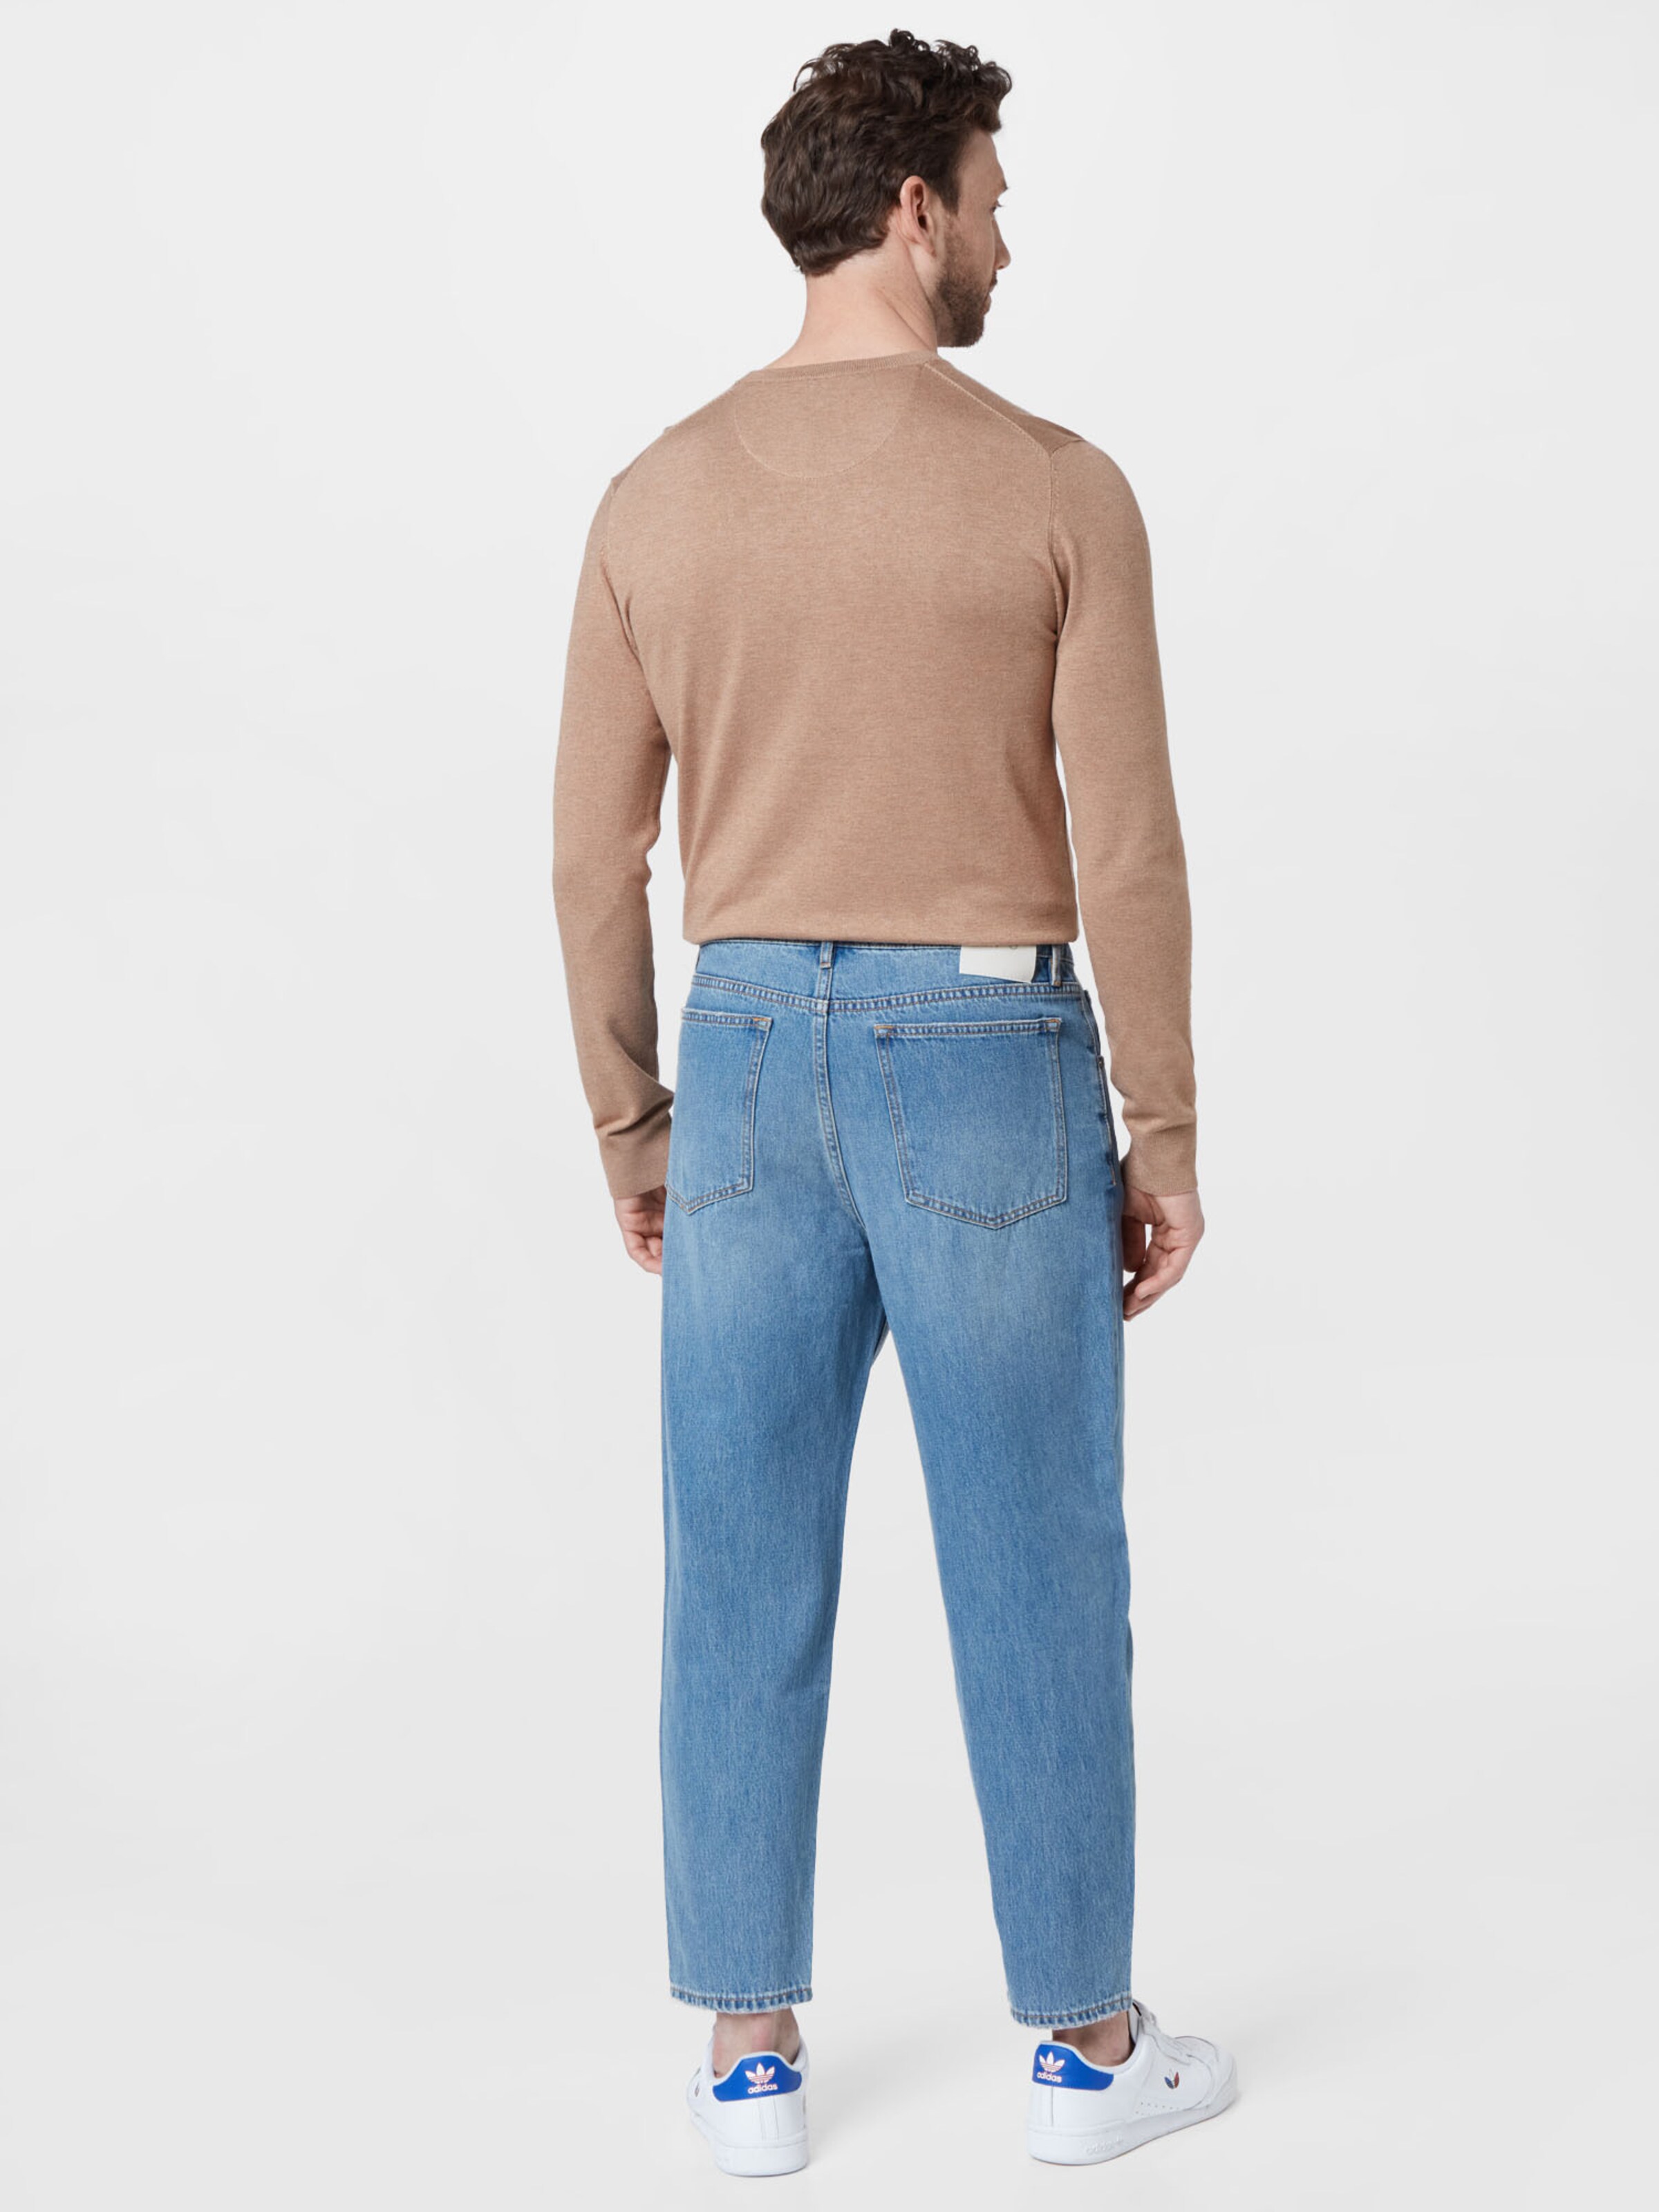 Männer Jeans Young Poets Society Jeans 'Toni' in Blau - RI68445